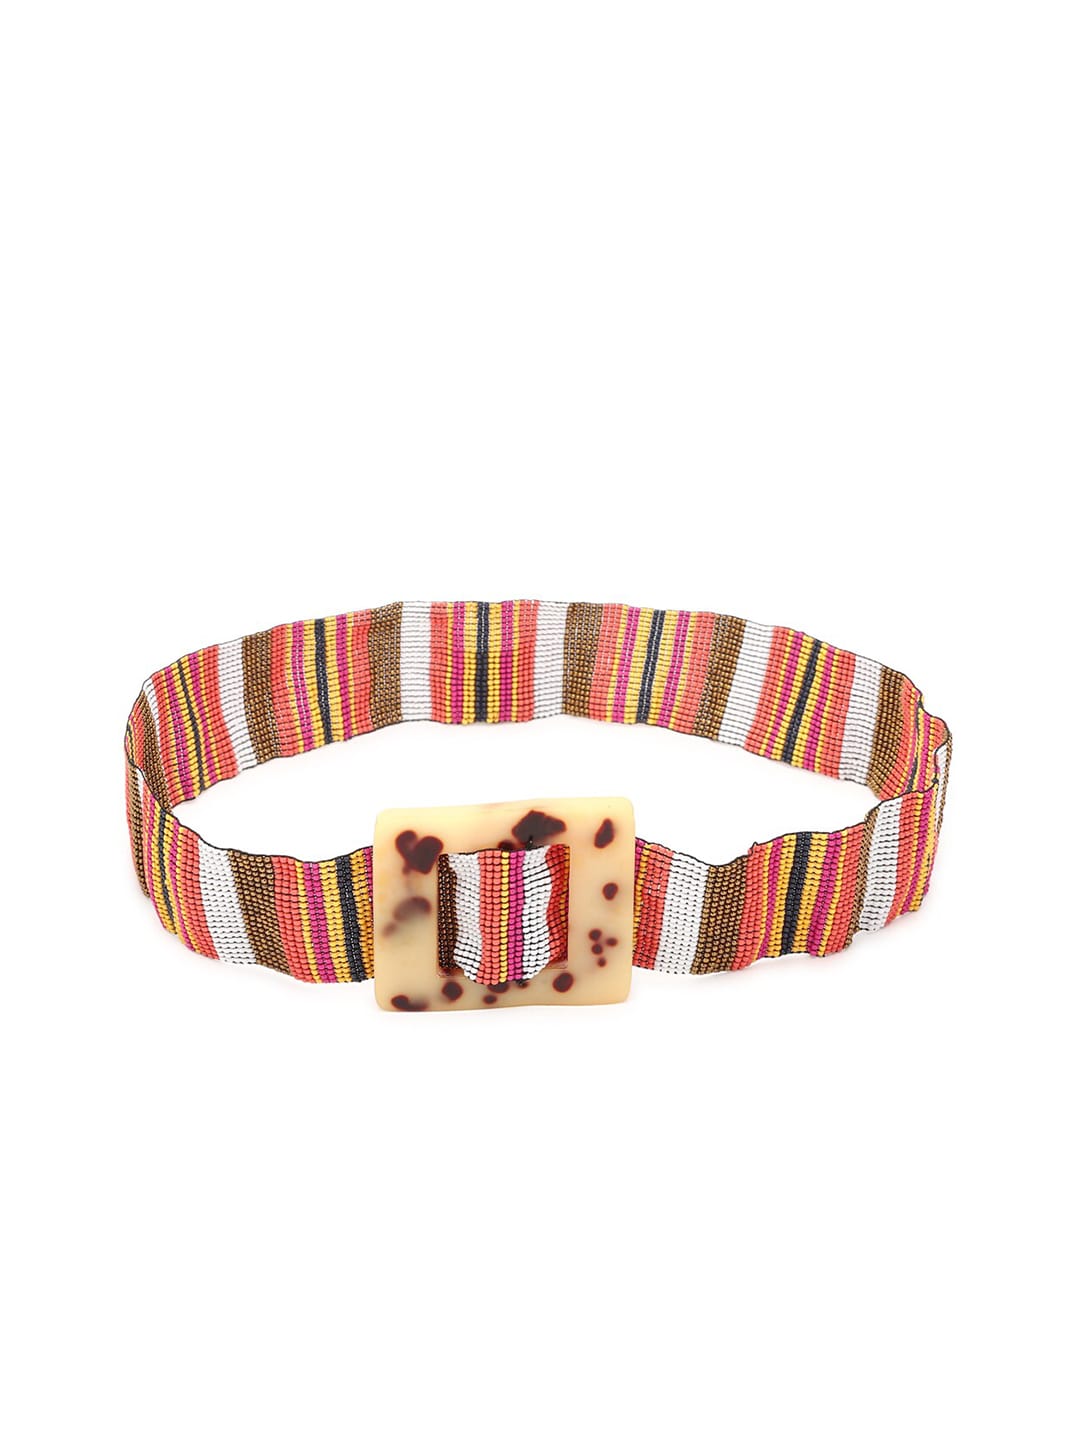 FOREVER 21 Women Peach-Coloured Striped Belt Price in India